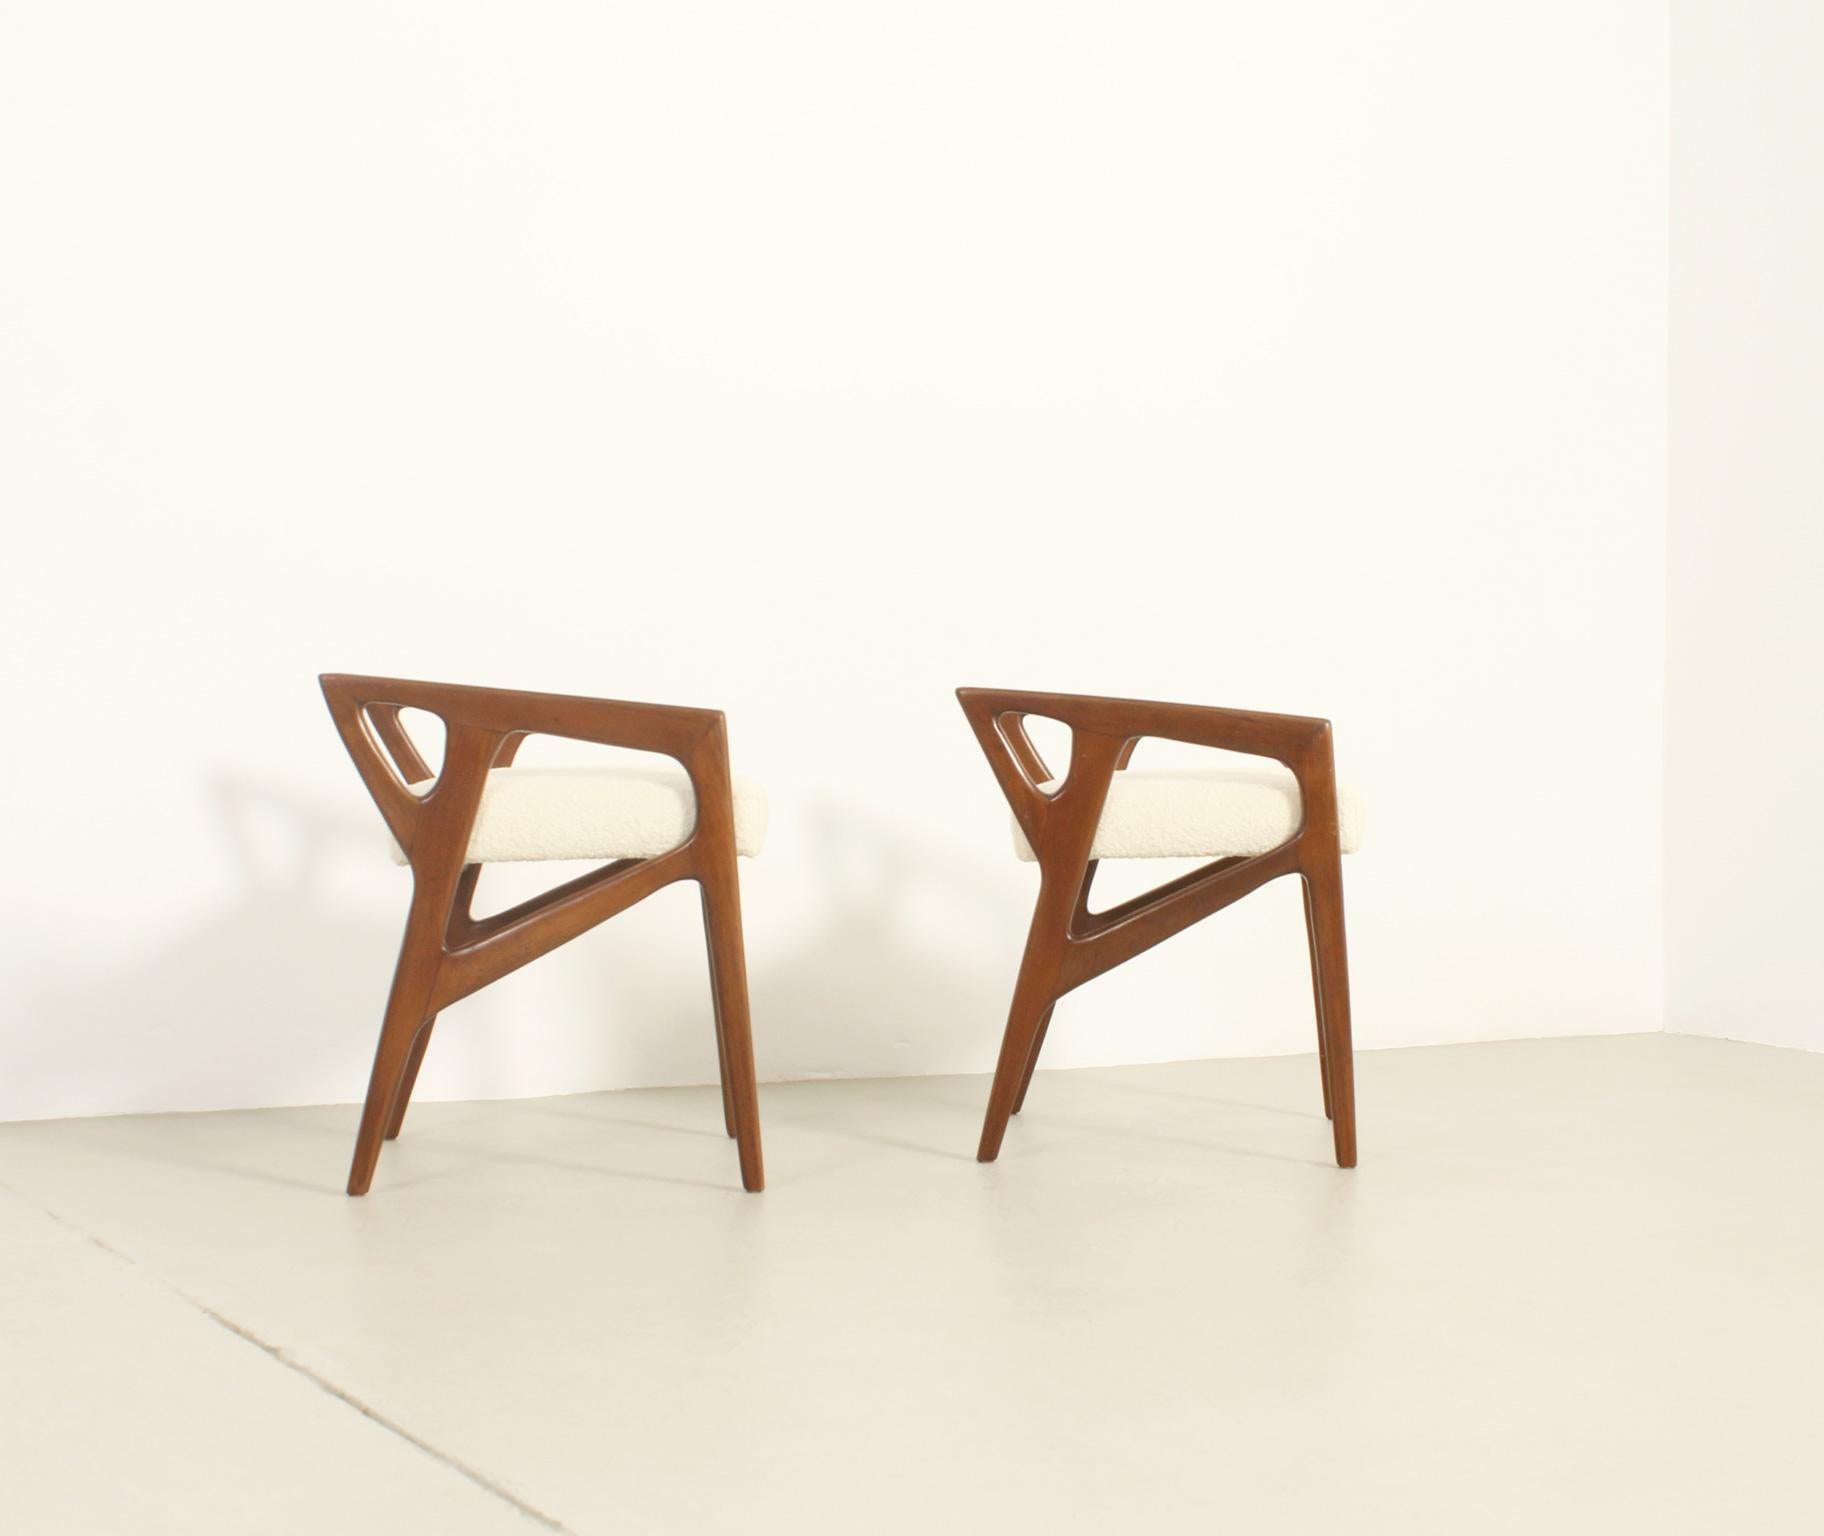 Pair of Stools by Gio Ponti for Cassina, Italy, 1953 For Sale 4